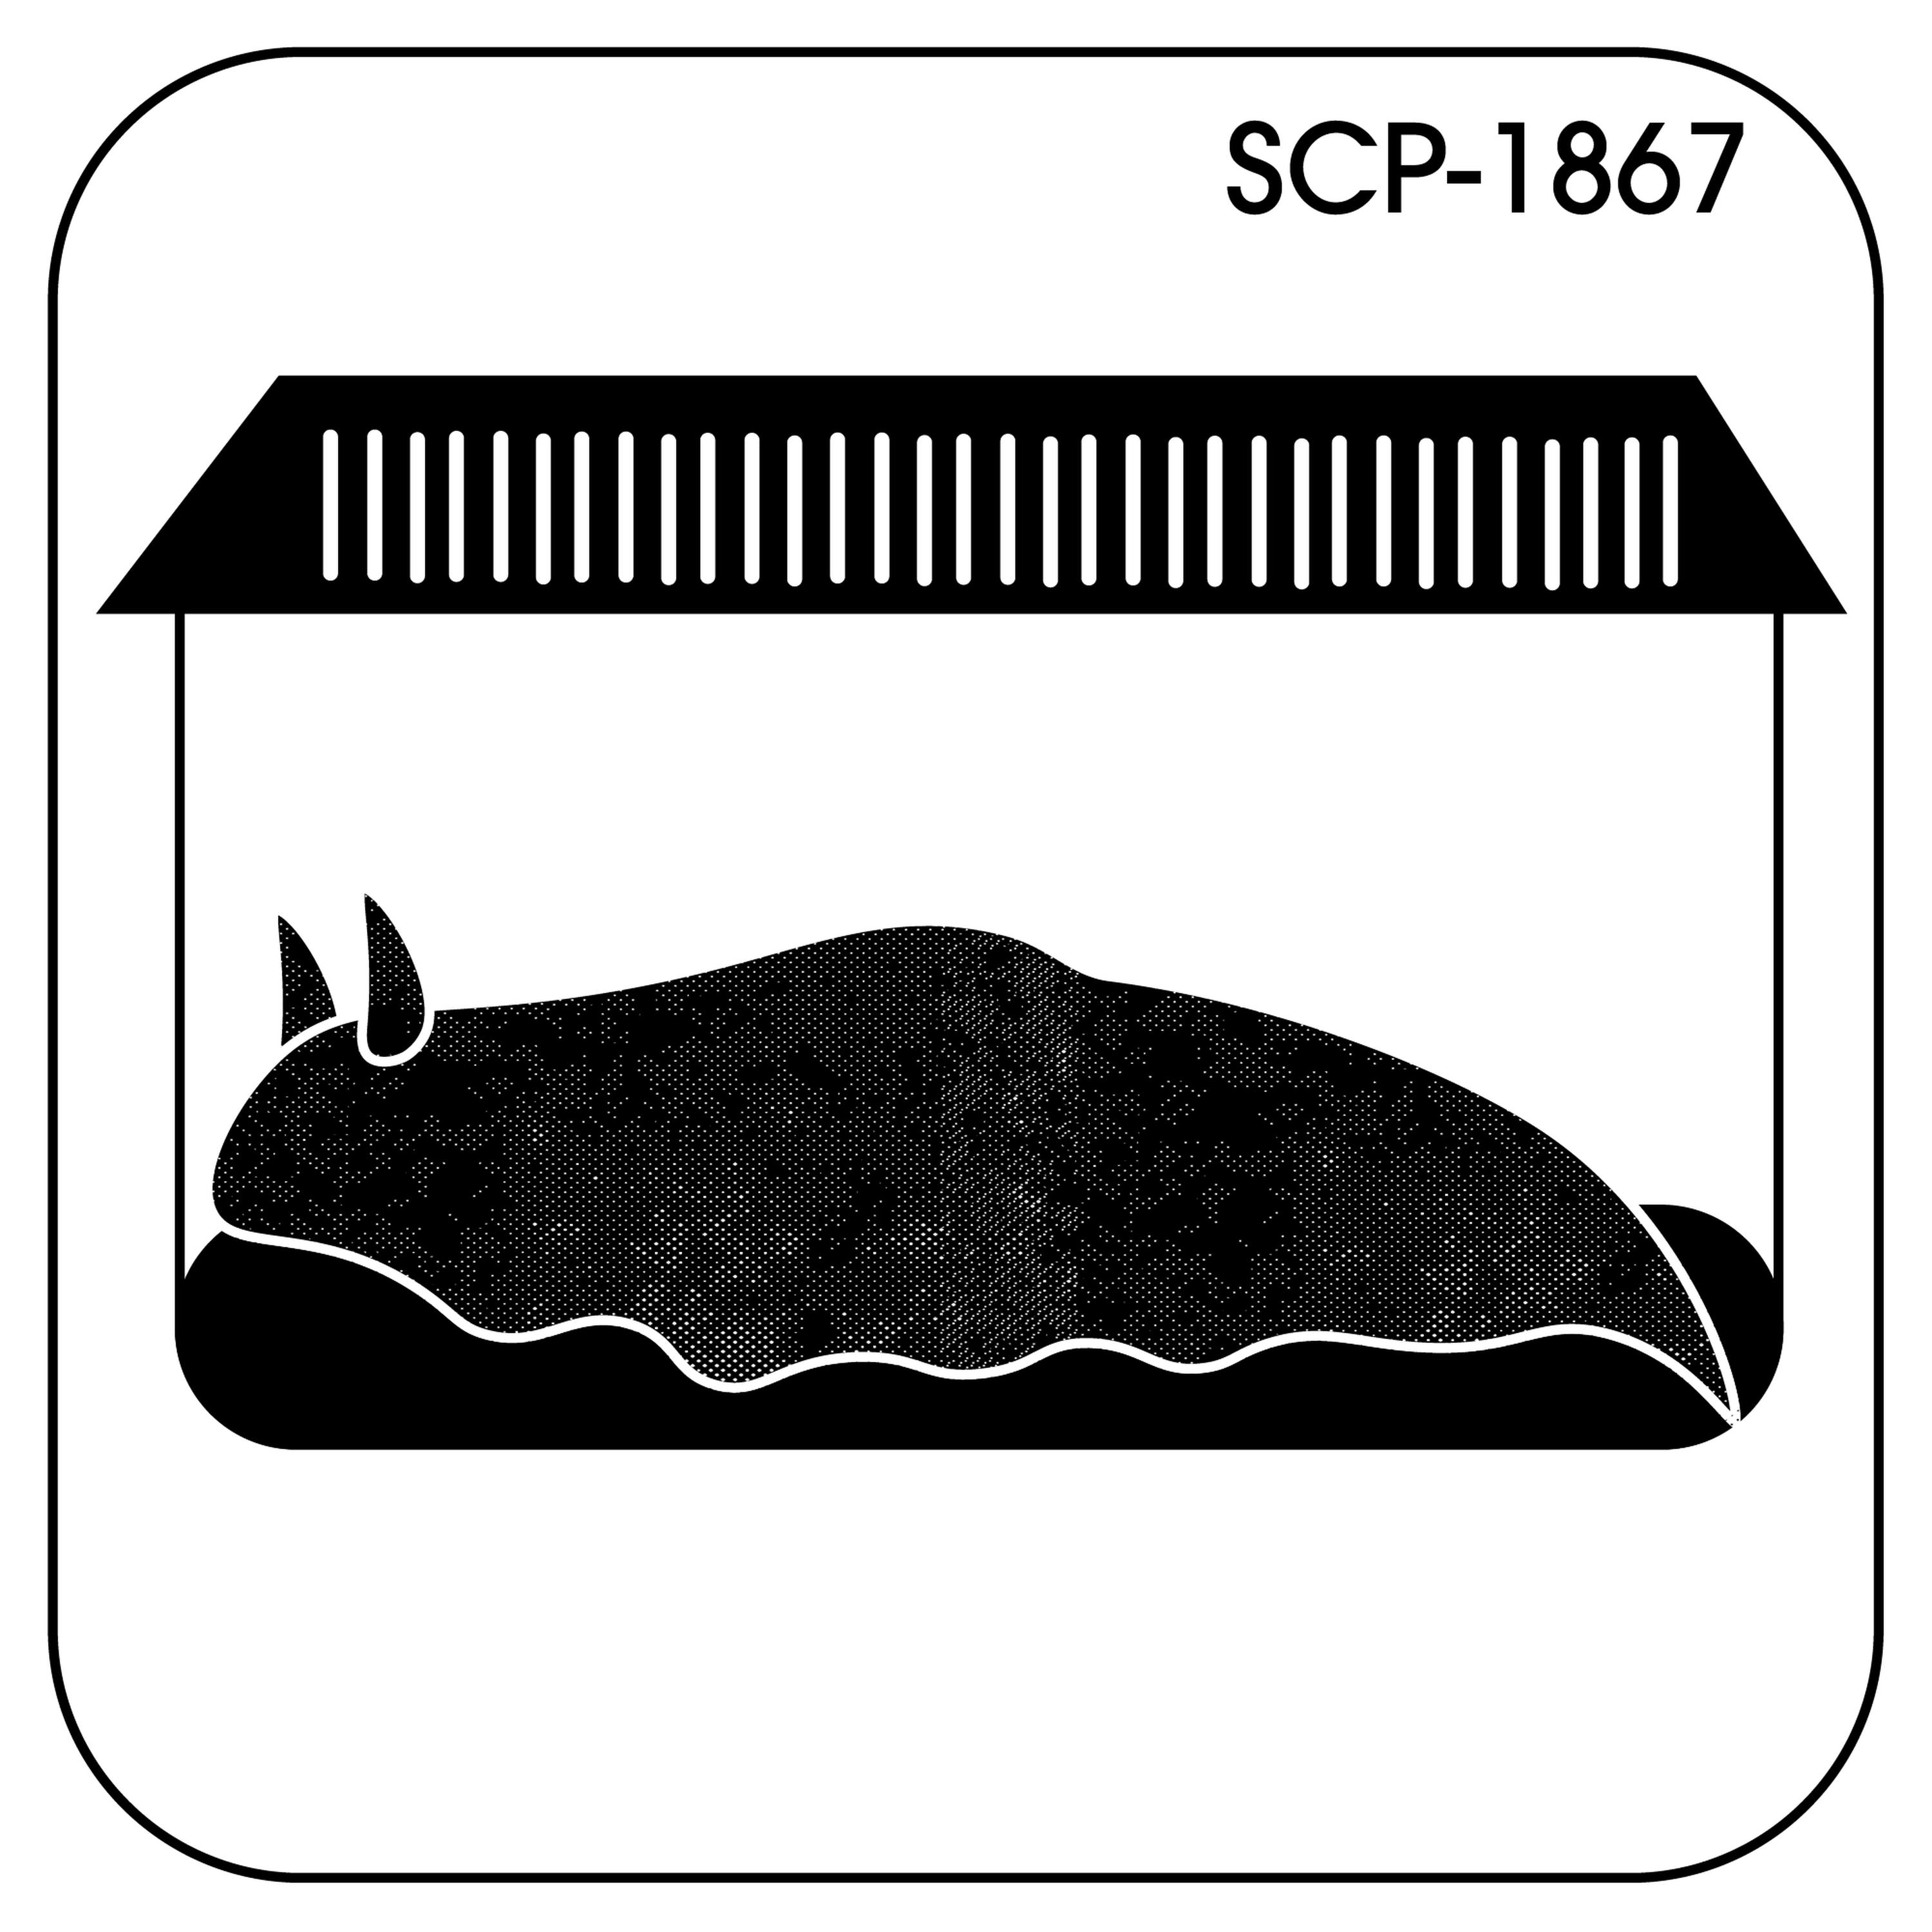 SCP-1867: 